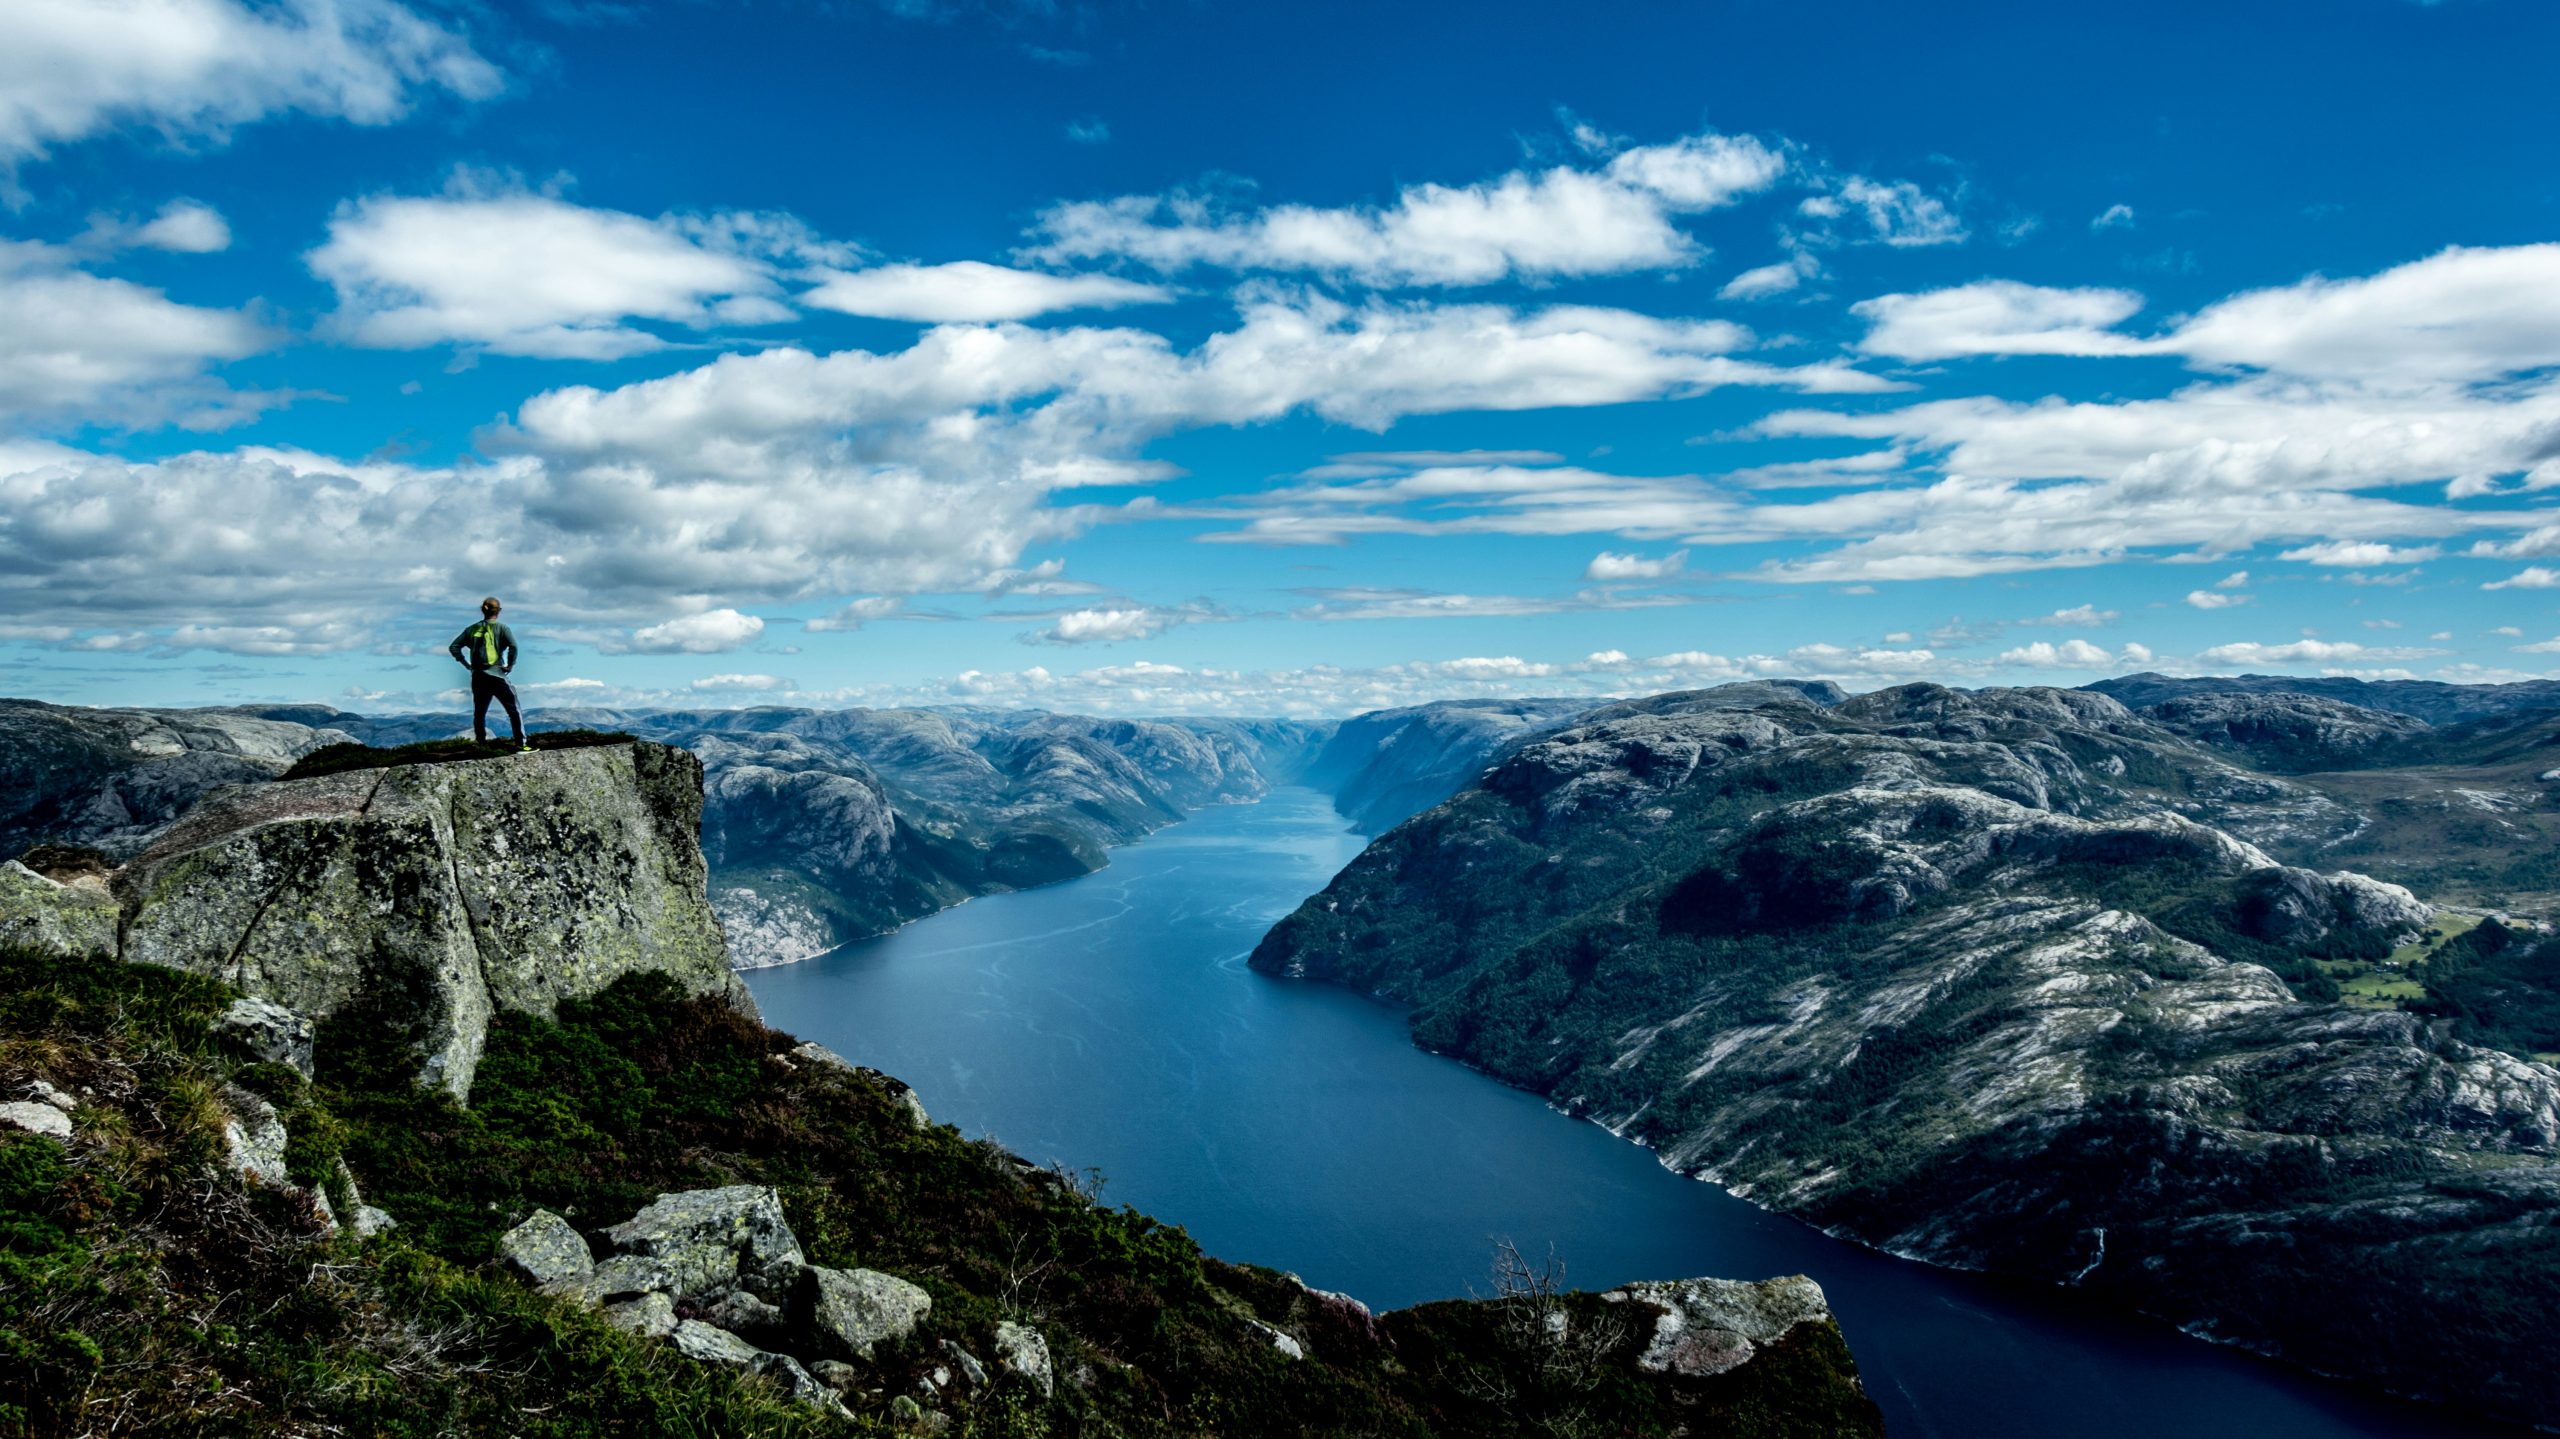 explore the breathtaking natural beauty of norway's fjords, with their dramatic cliffs, crystal-clear waters, and stunning landscapes.